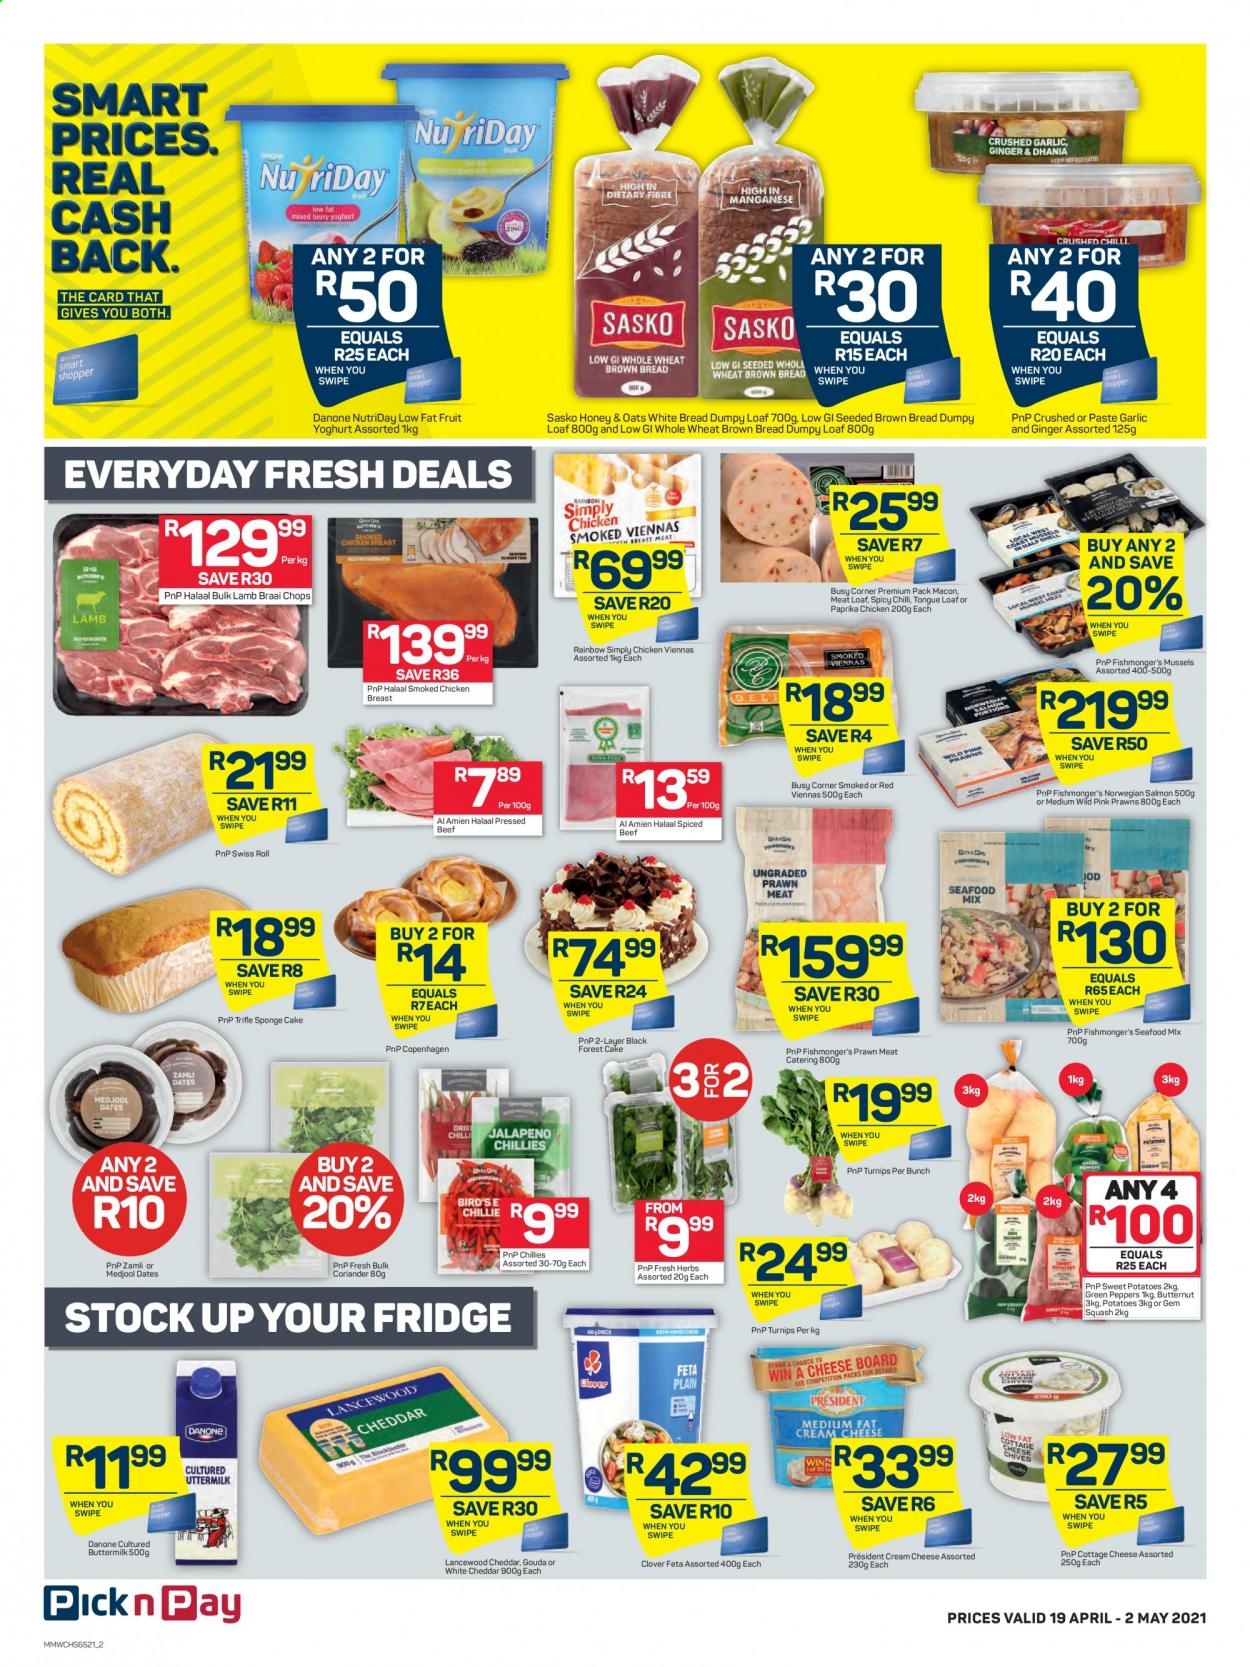 Pick n Pay specials - 04.19.2021 - 05.02.2021. 